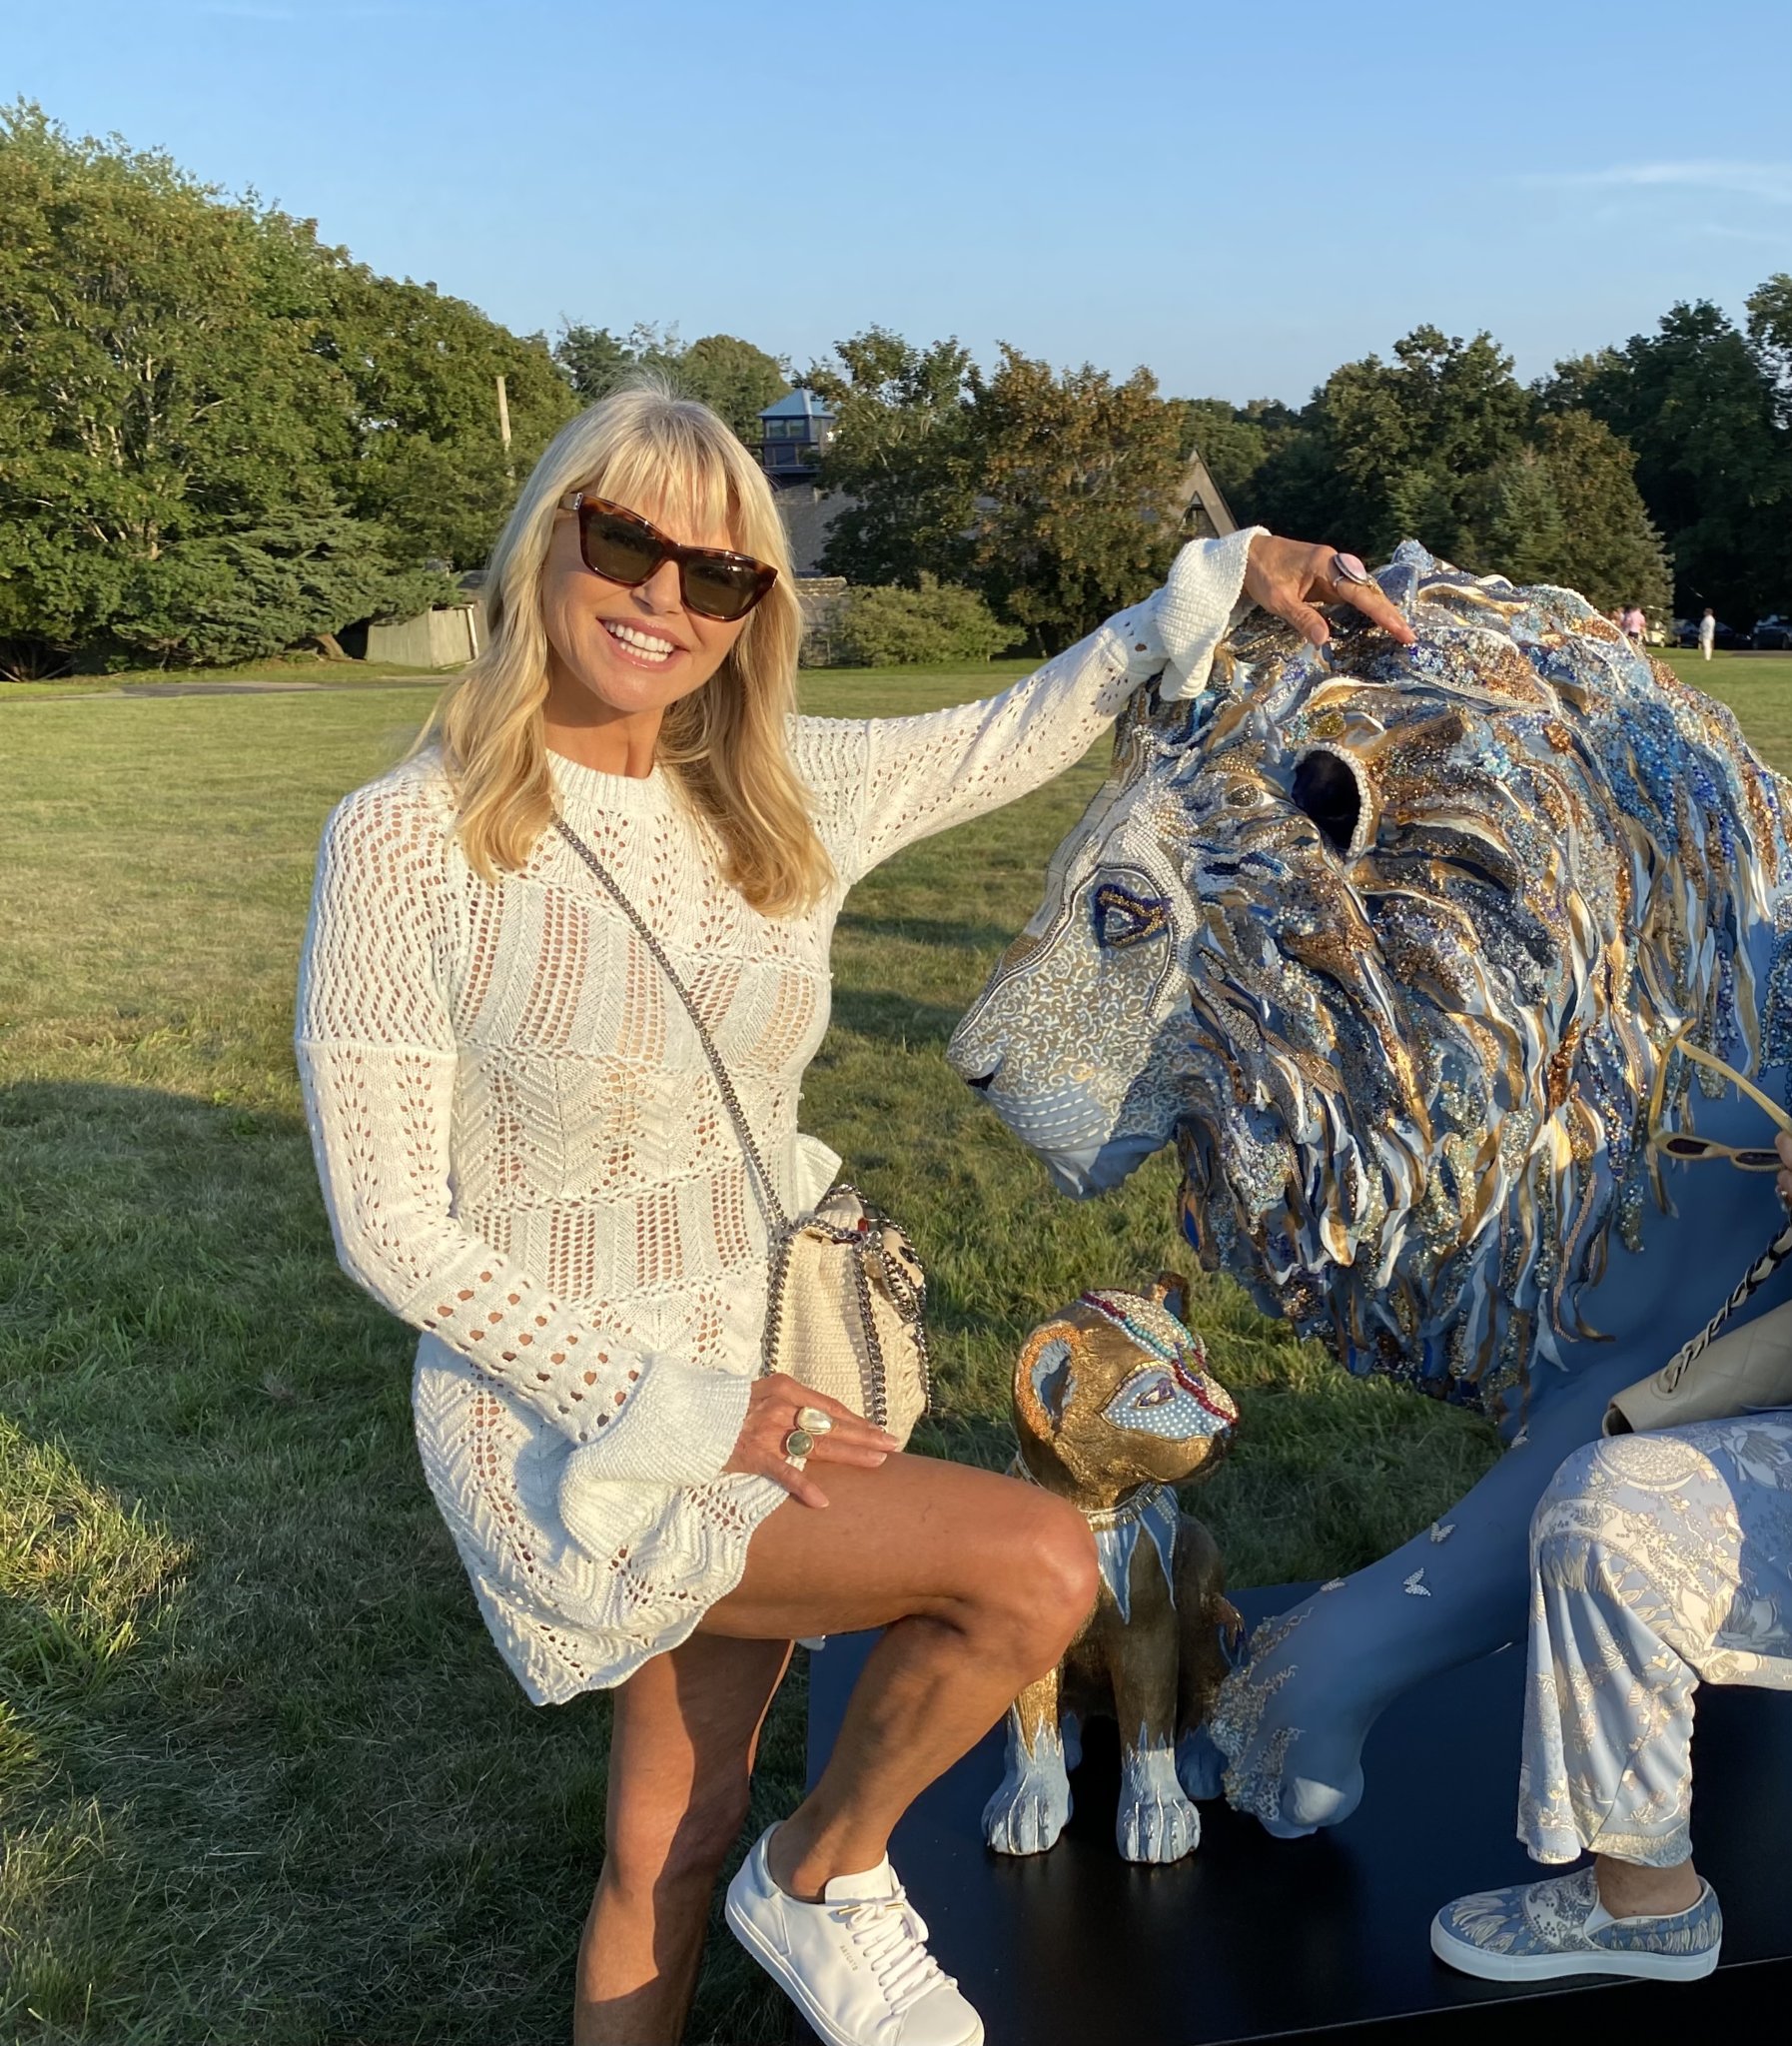 Christie Brinkley with one of the lions for the parade.